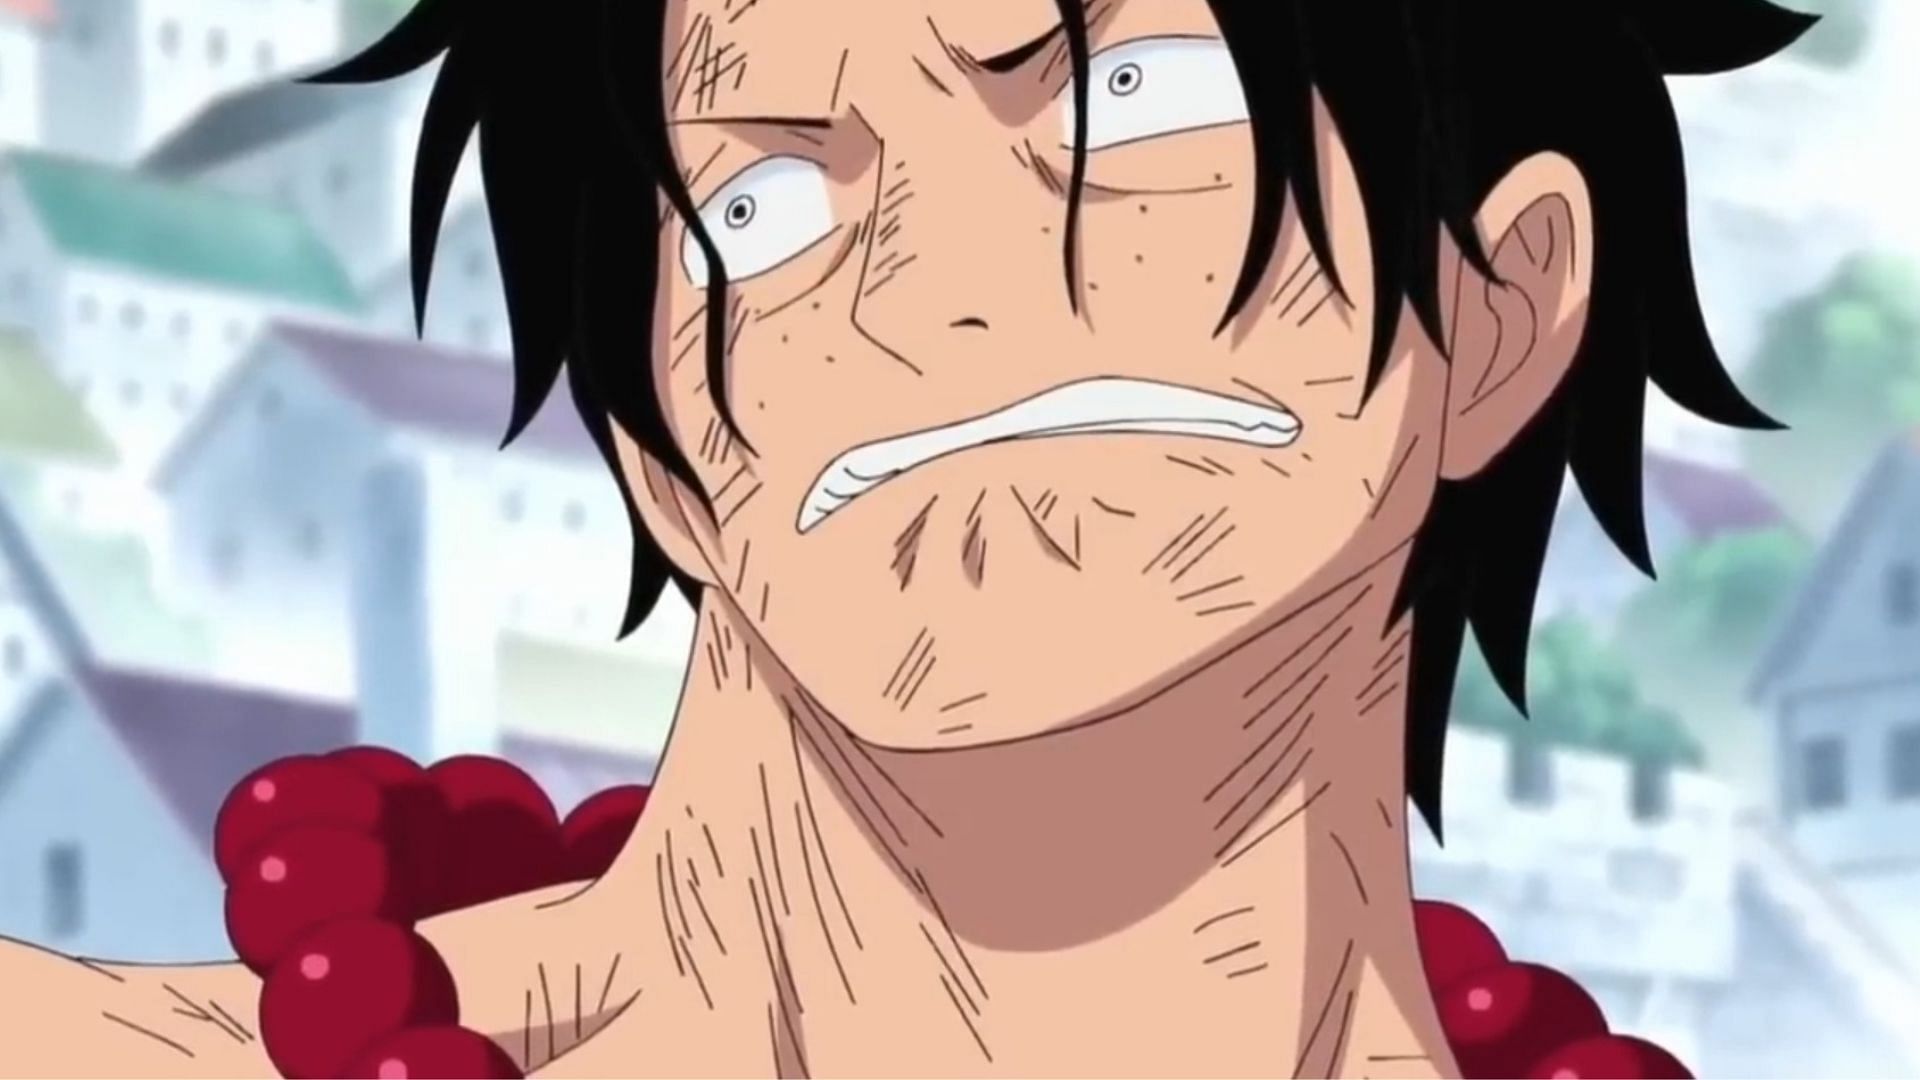 Oda regretted this character's death in the One Piece anime - Dexerto